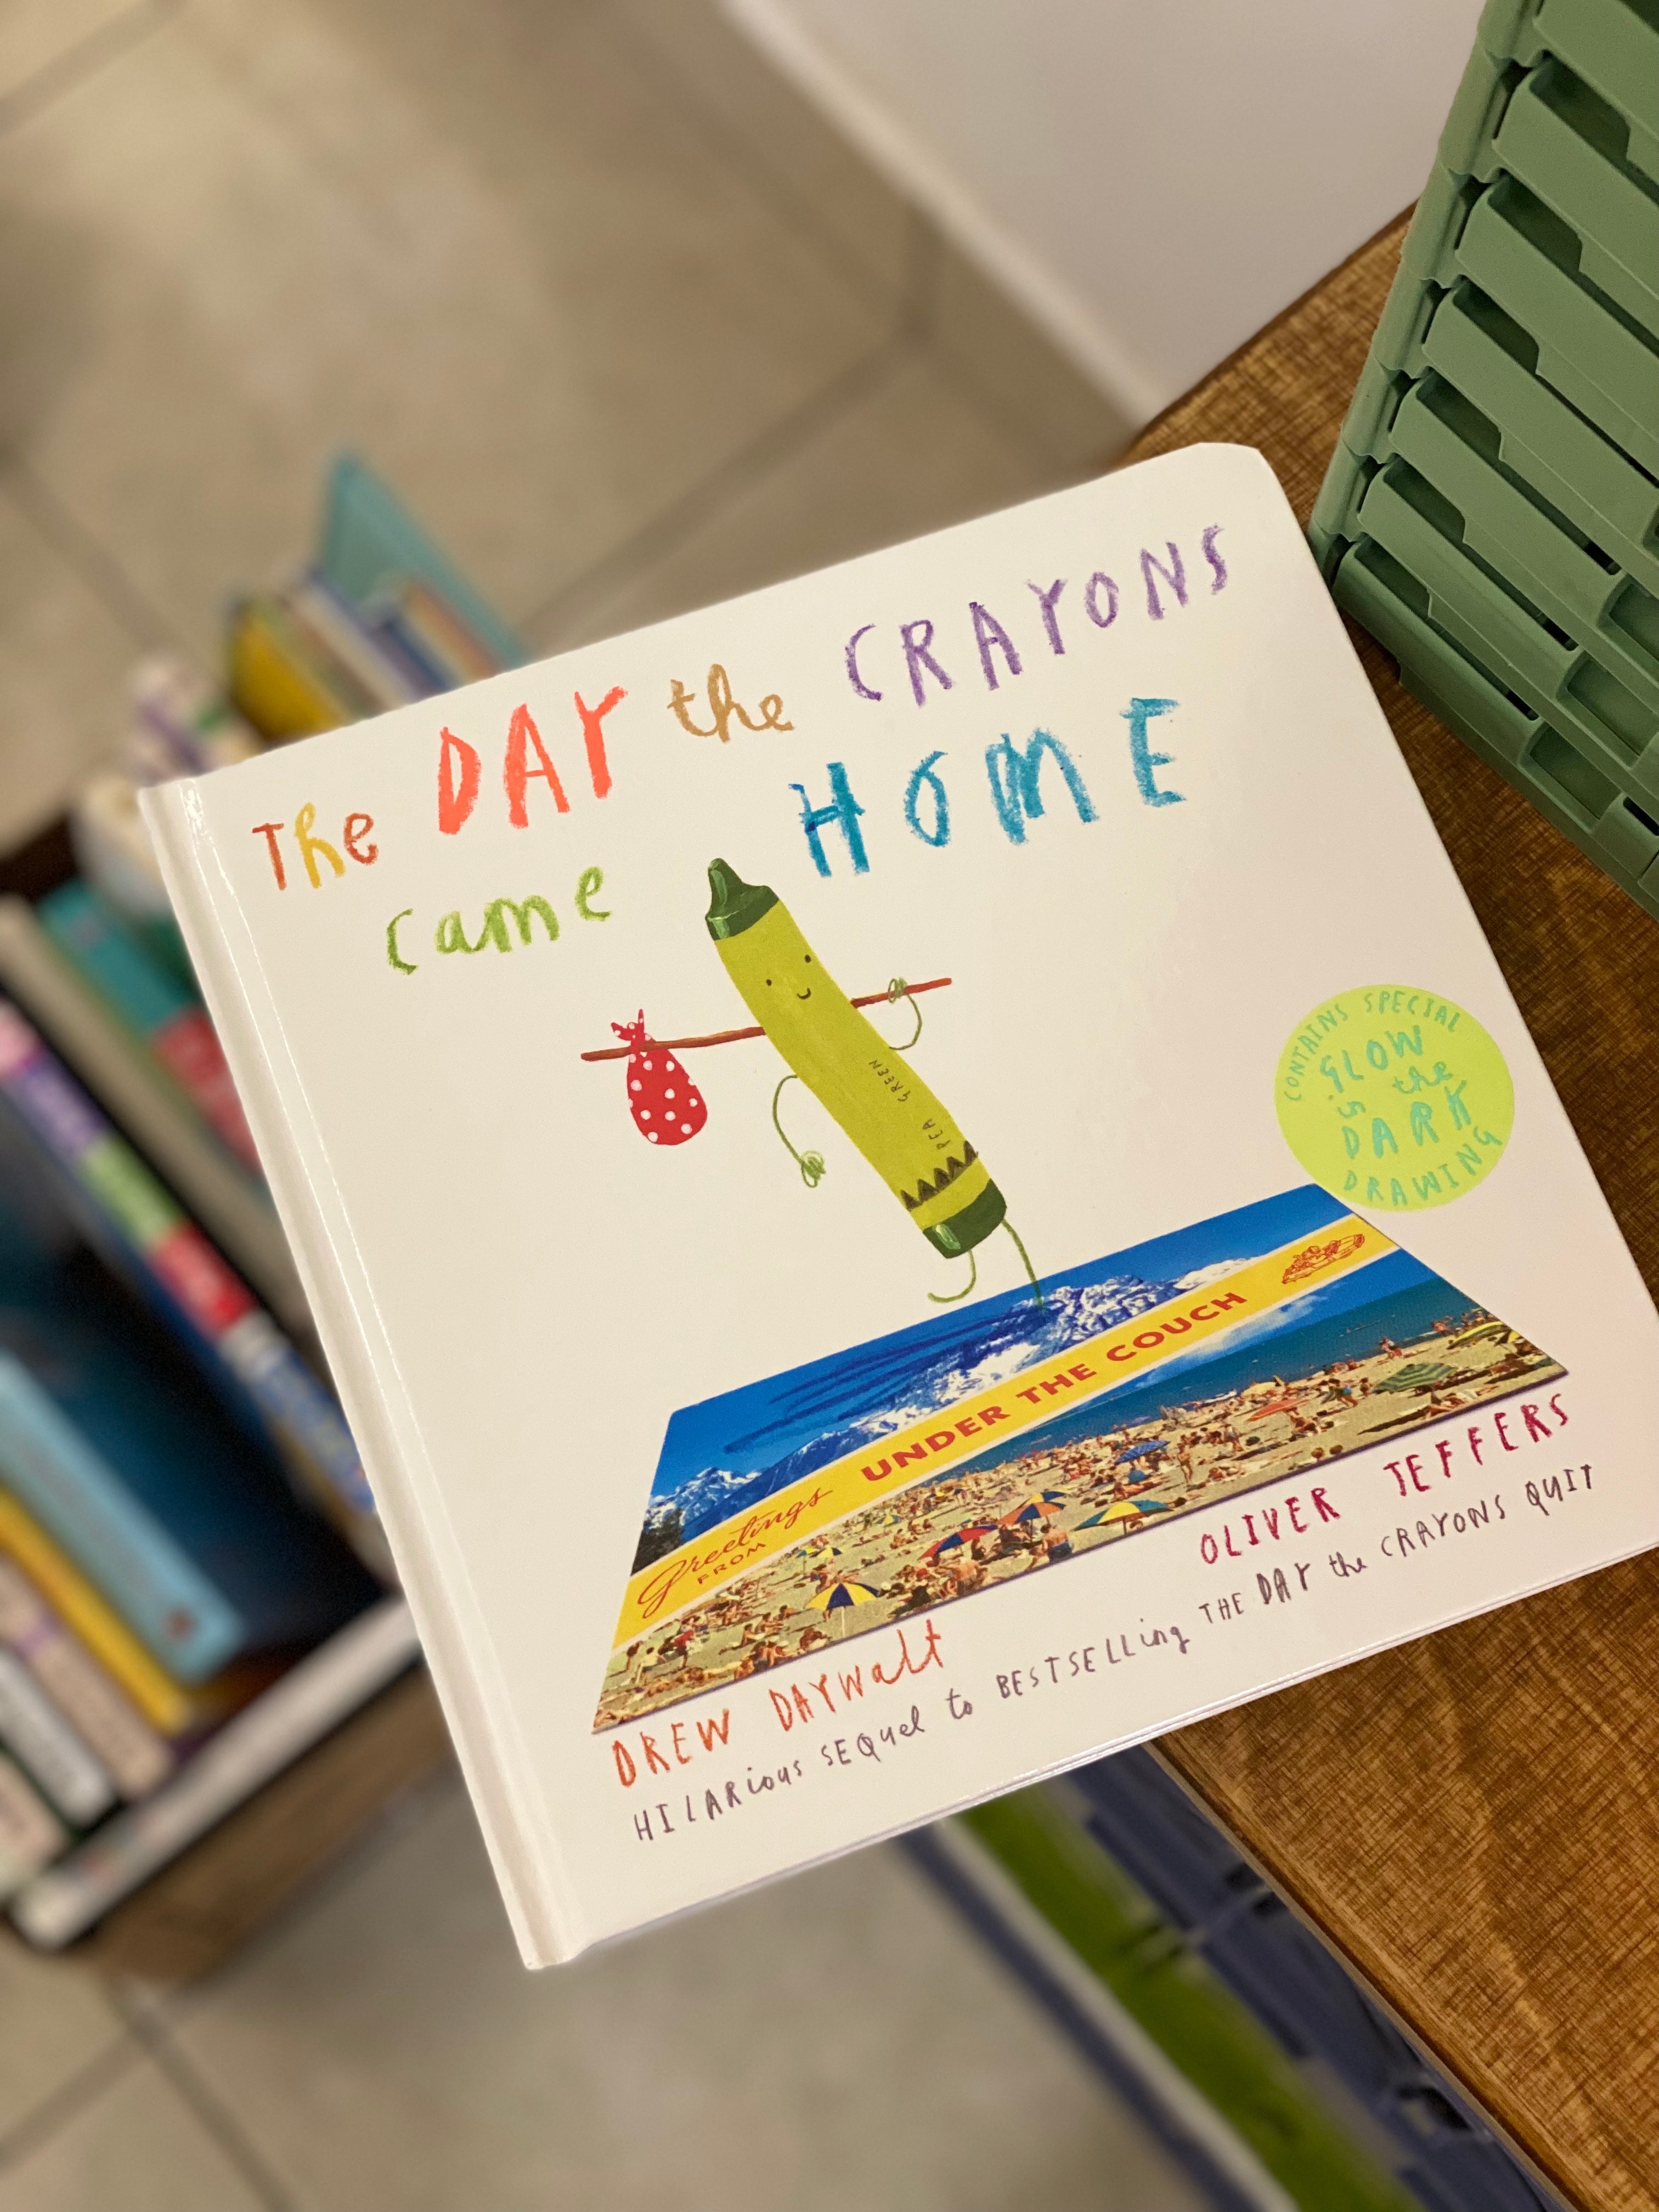 The Day the Crayon Came Home